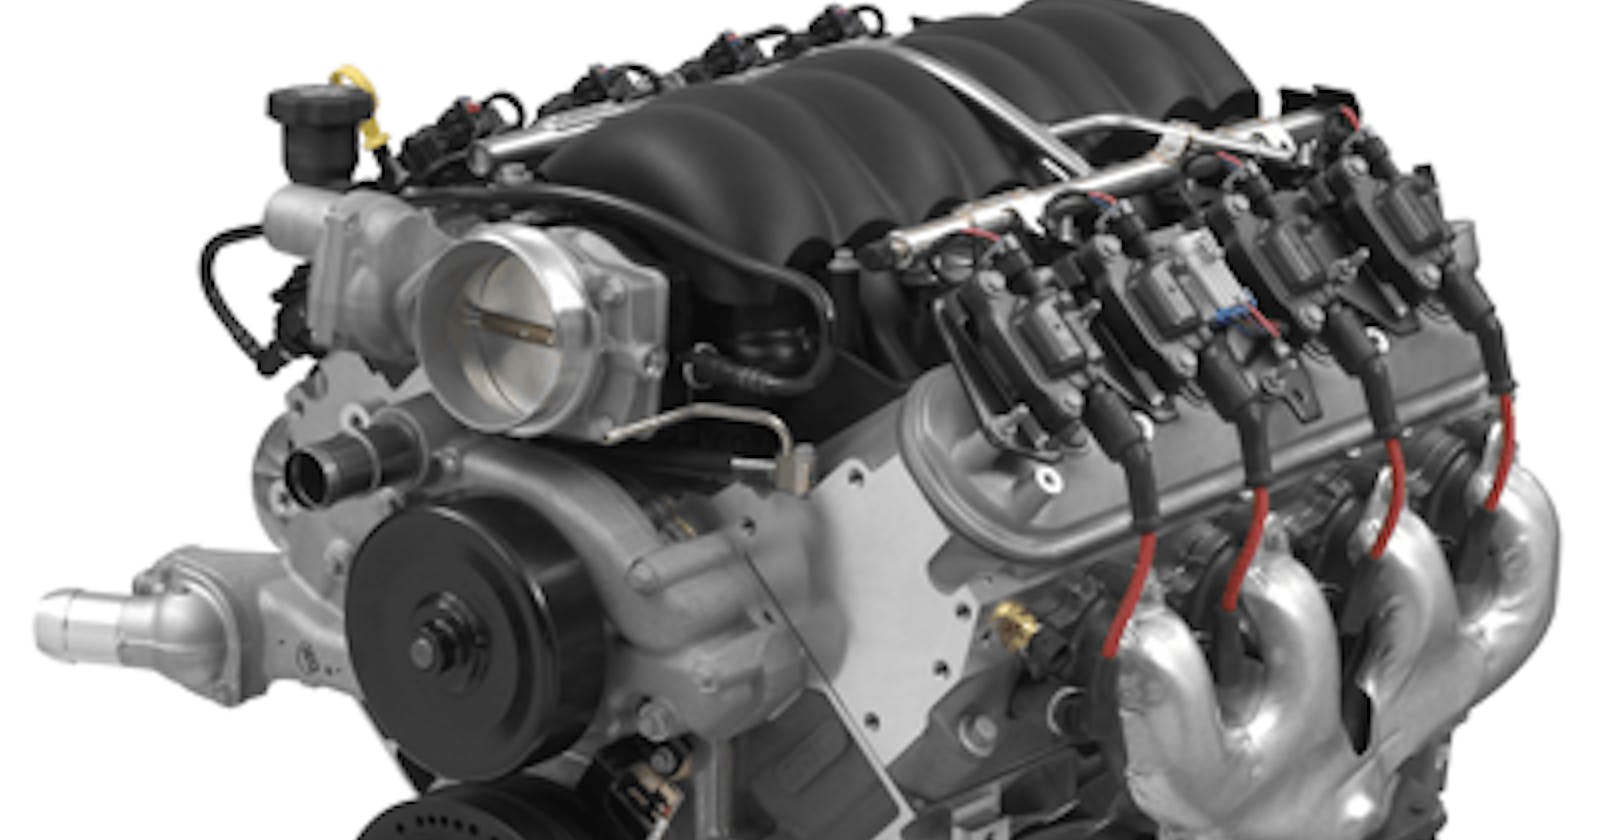 LS V8 Engine Buying: Beginners’ Guide